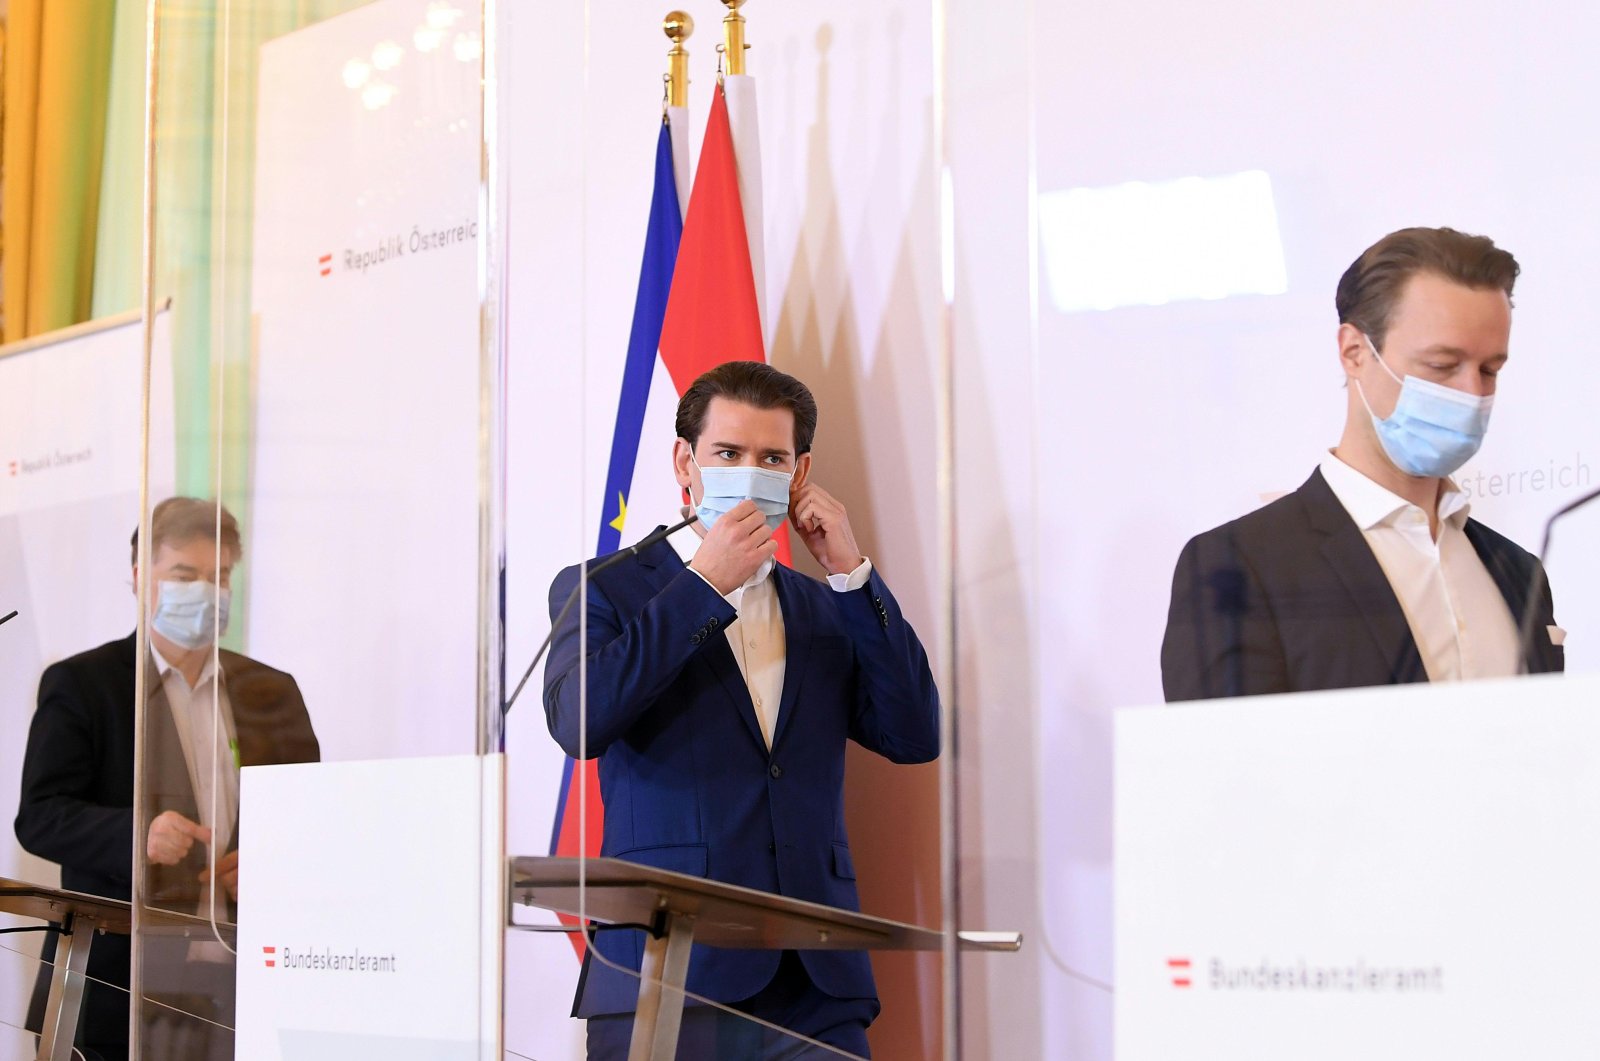 (L-R) Austria's Vice-Chancellor Werner Kogler, Chancellor Sebastian Kurz and Finance Minister Gernot Bluemel wear face masks during a press conference on May 25, 2020 at the Chancellery in Vienna, amid the novel coronavirus / COVID-19 pandemic. (AFP Photo)